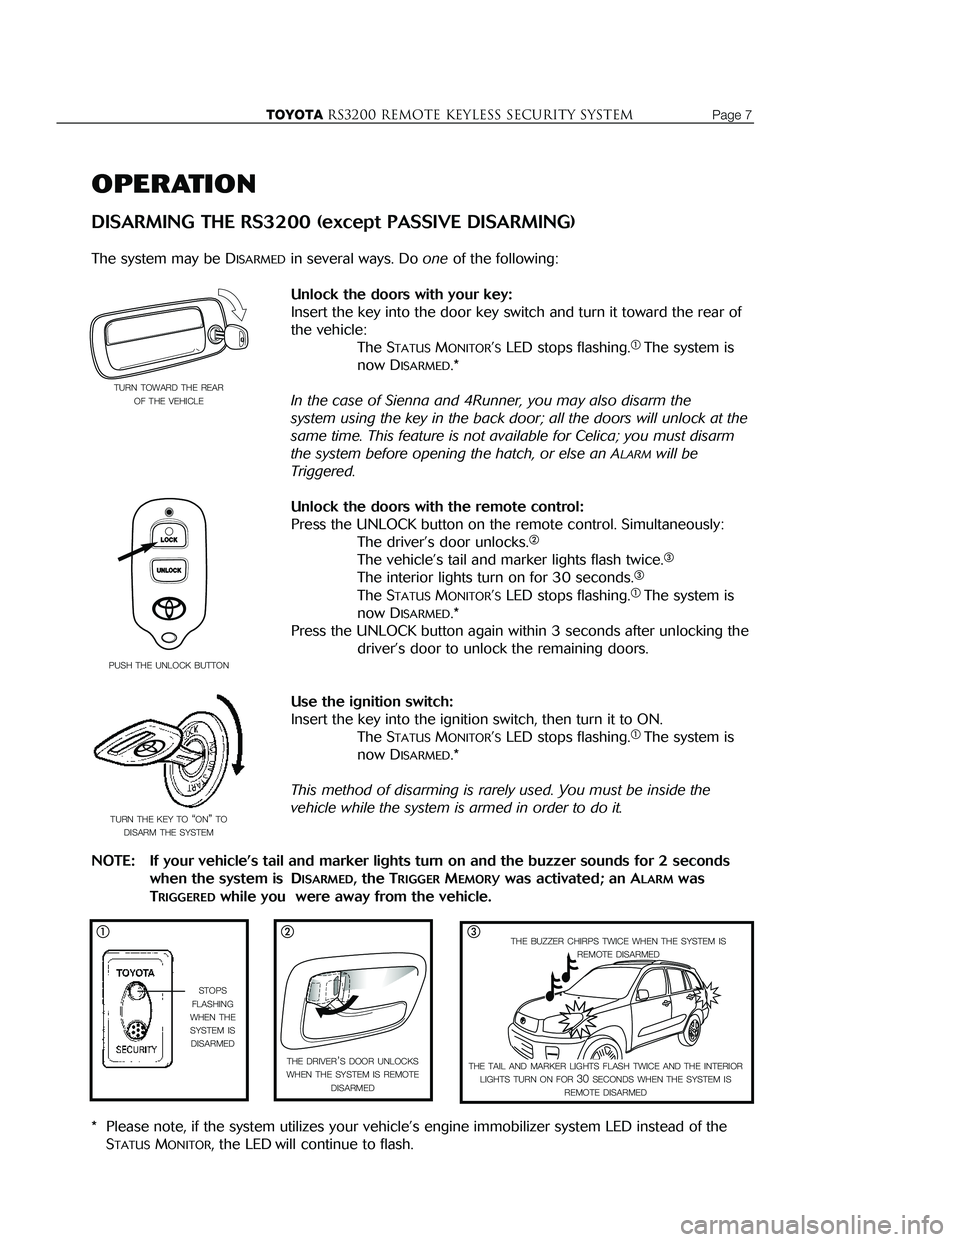 TOYOTA ECHO 2000  Accessories, Audio & Navigation (in English) Page 14                    TOYOTARS3200 REMOTE KEYLESS Security systemTOYOTARS3200 remote keyless Security systemPage 7
OPERATION
DISARMING THE RS3200 (except PASSIVE DISARMING)
The system may be DISA